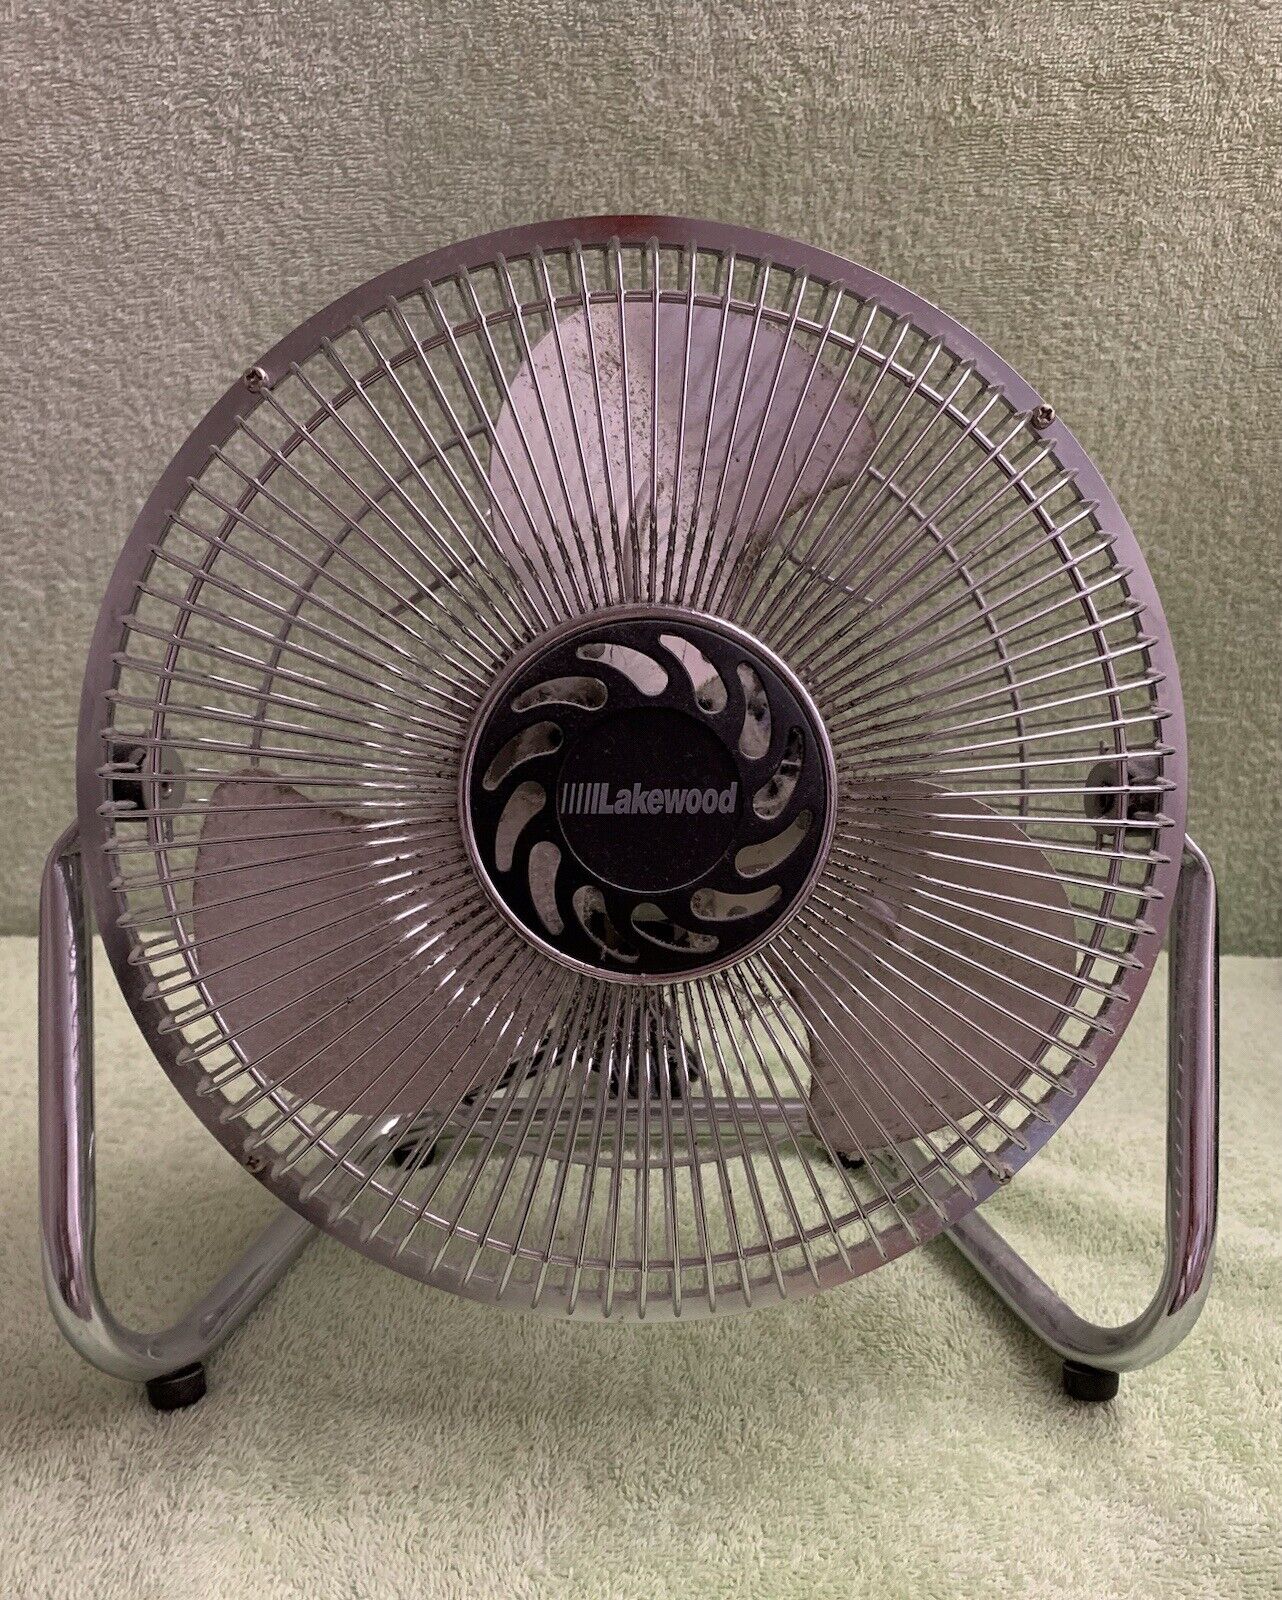 Vintage Lakewood Electric 3 Speed Chrome Fan Model HV-9 Tested and Working Well